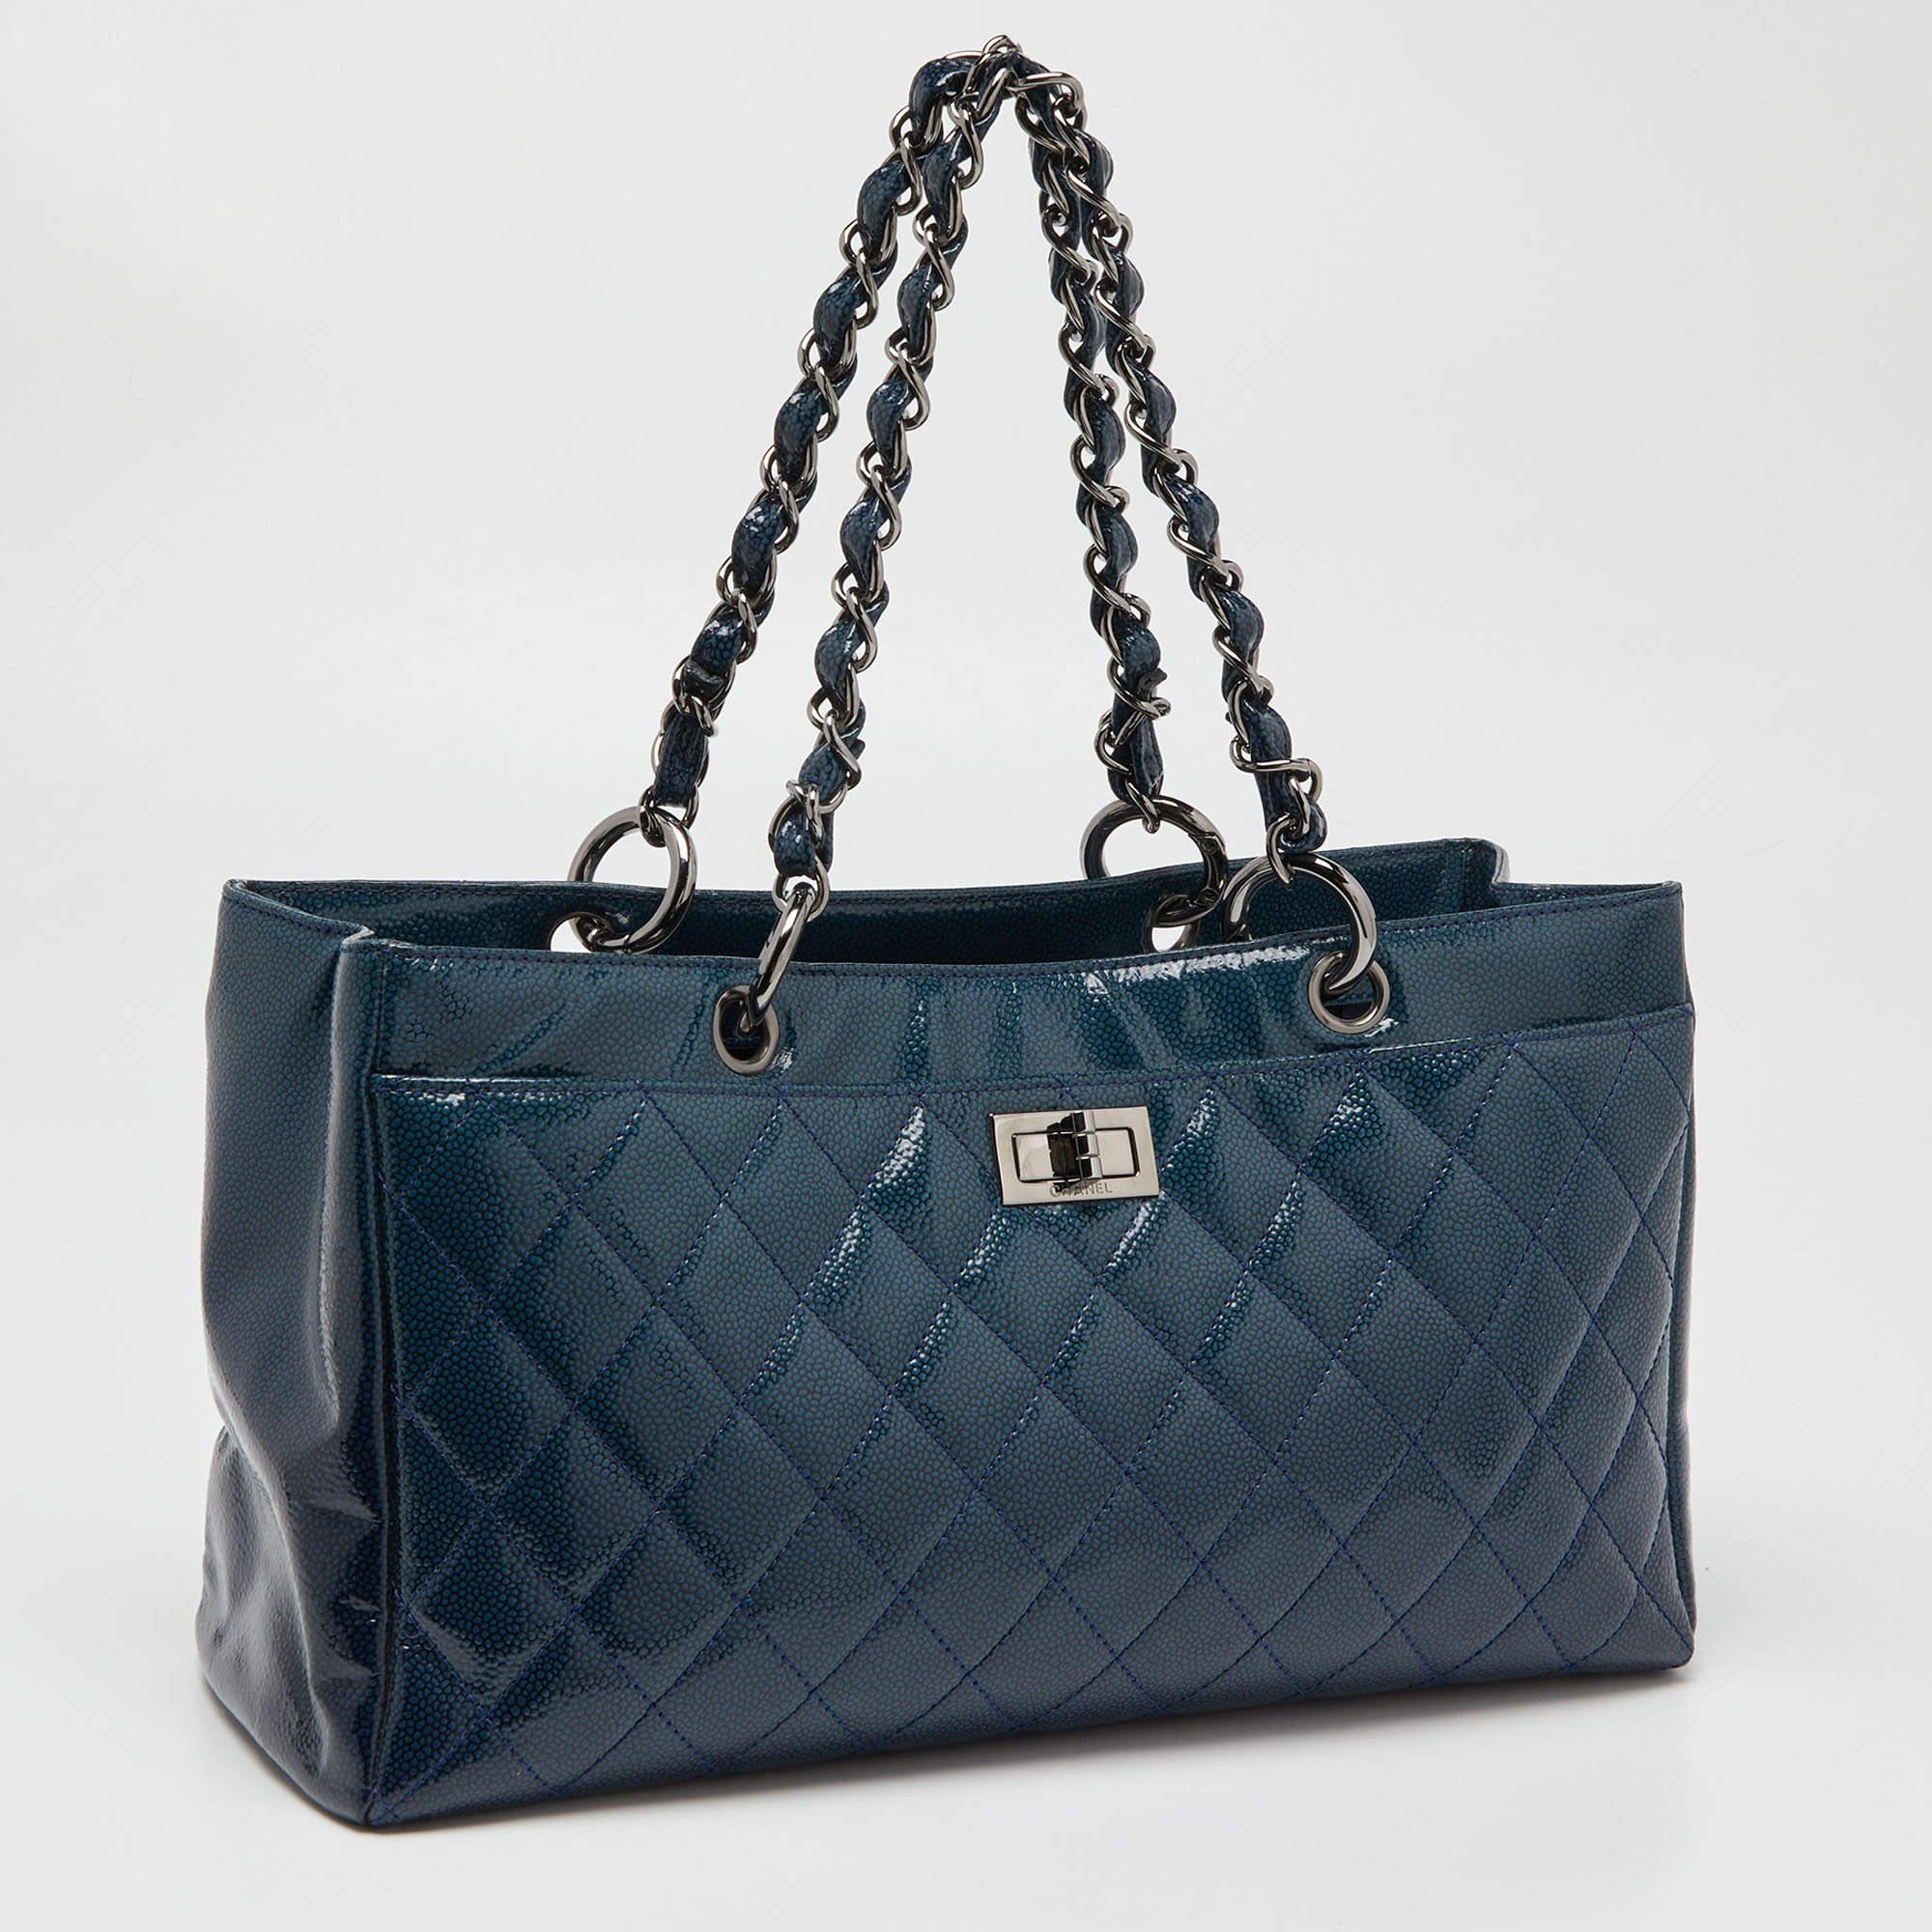 Women's Chanel Blue Diamond Shine Quilted Leather Reissue Tote